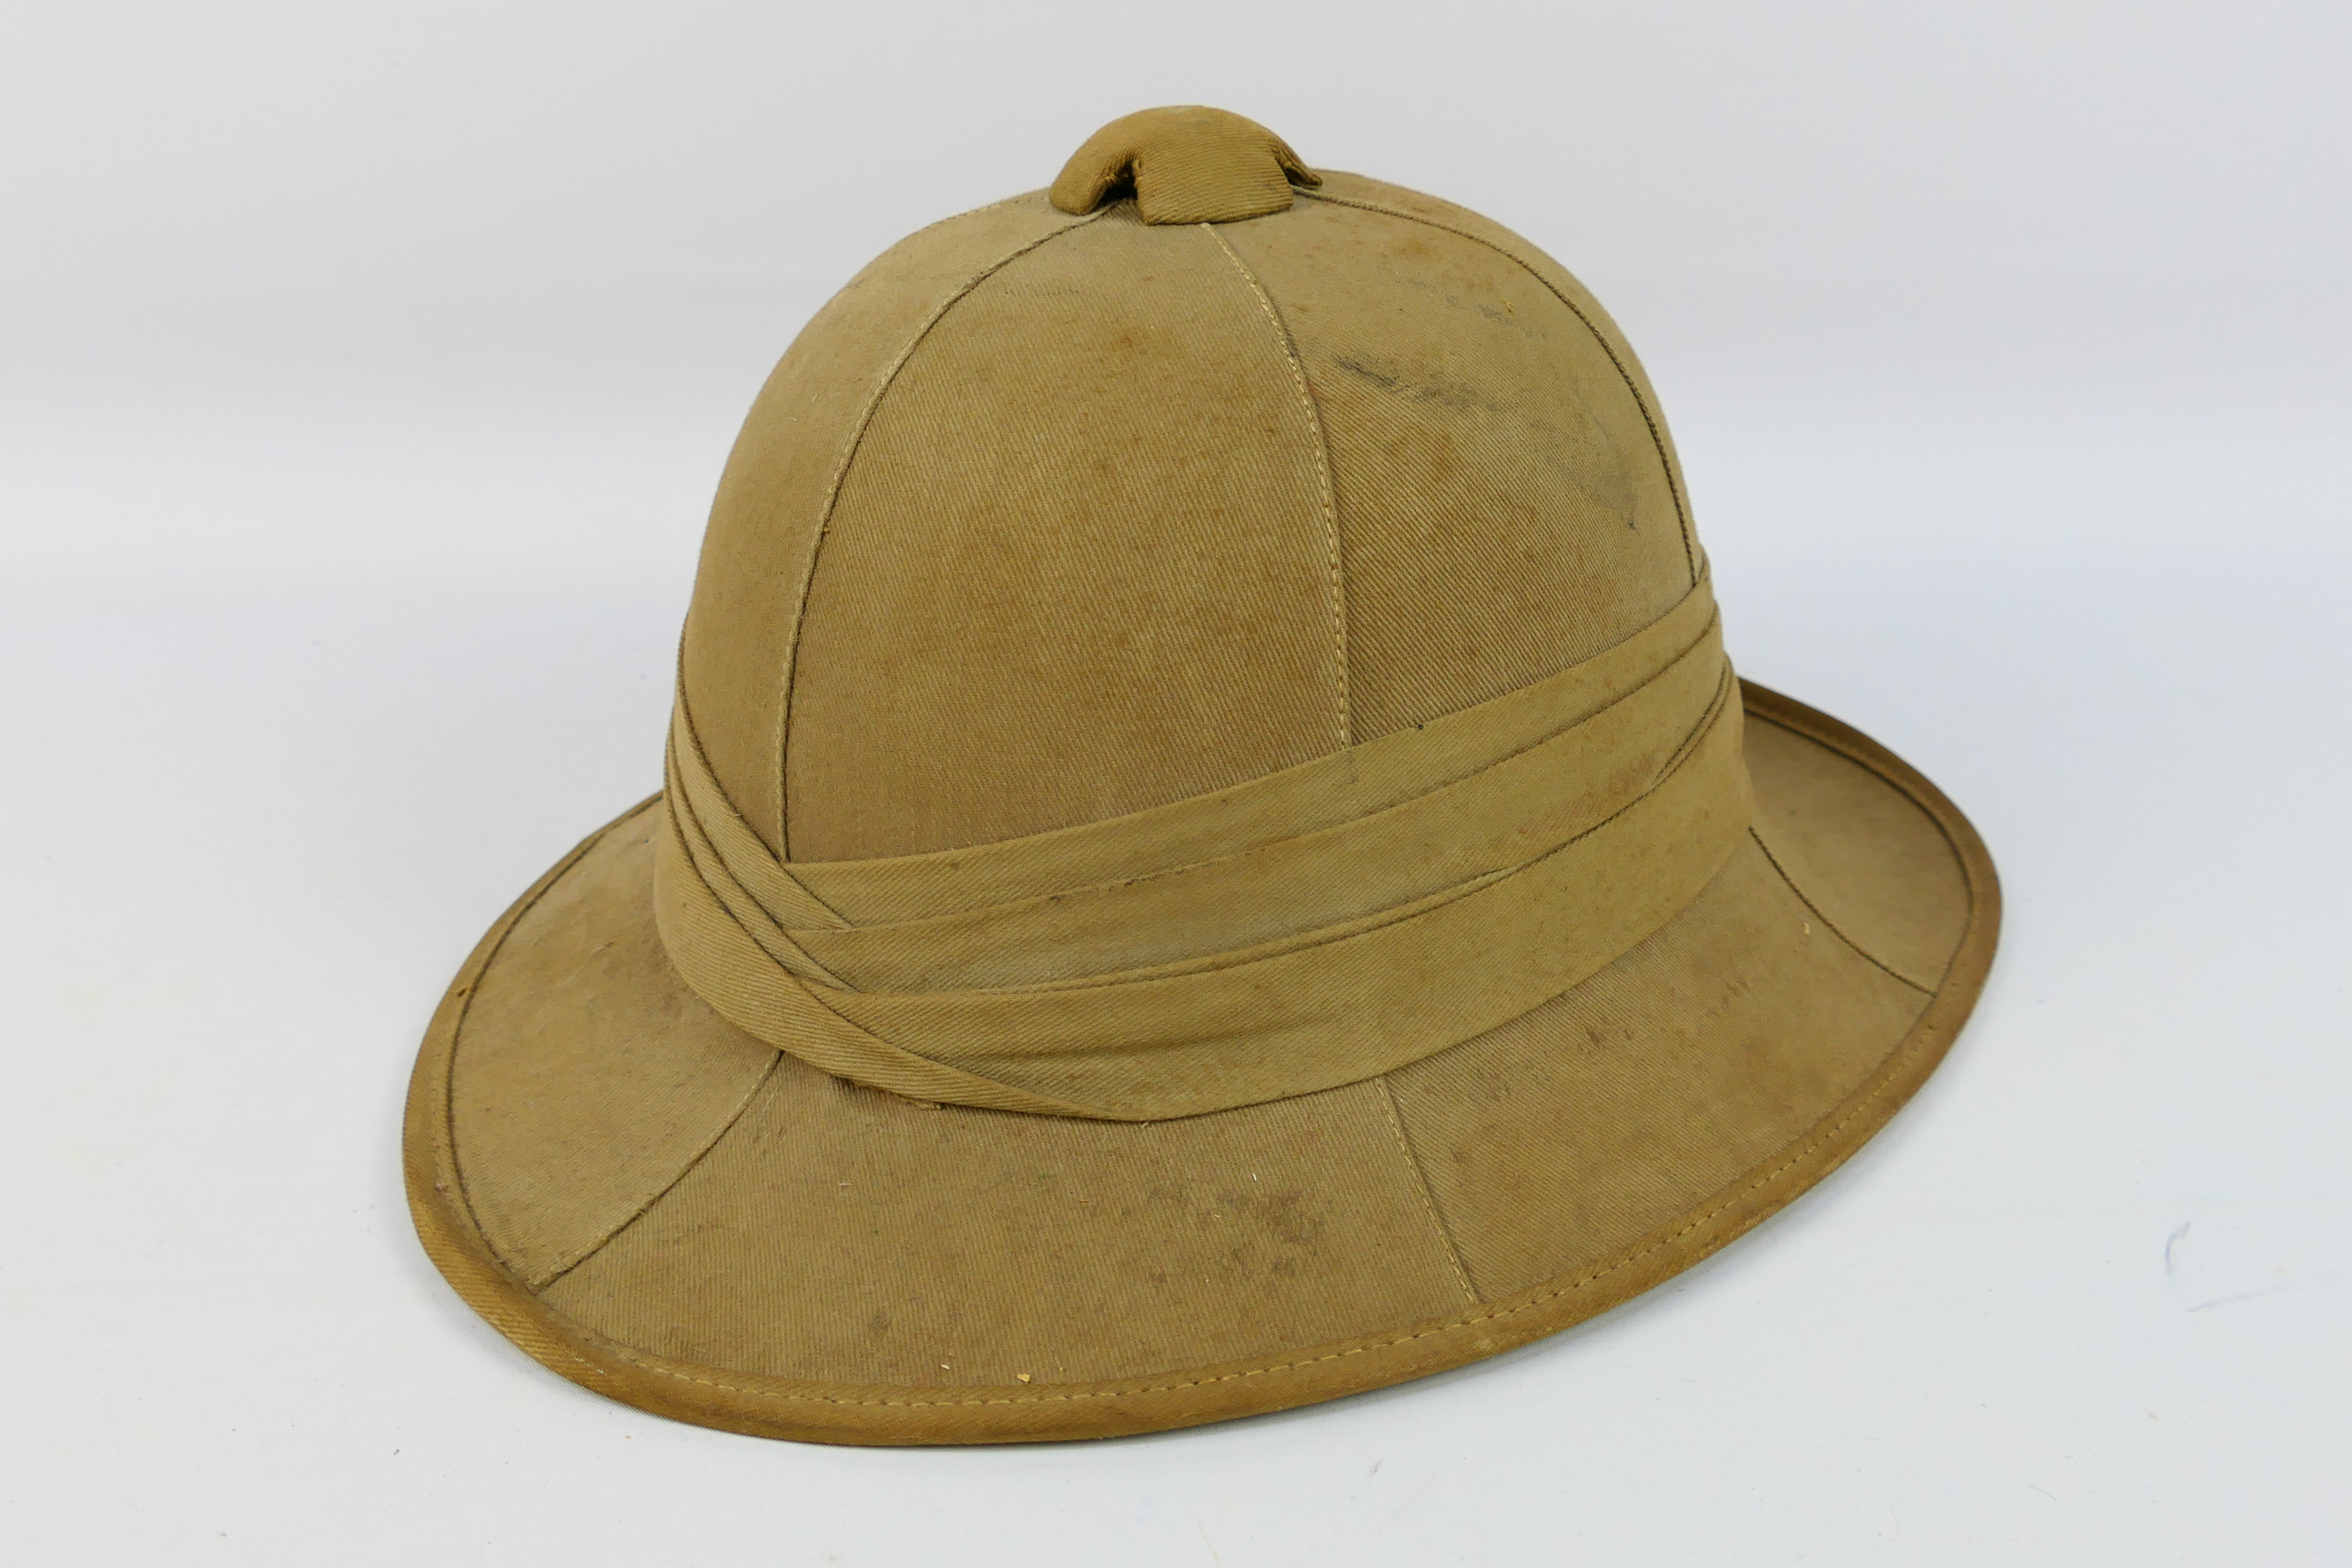 A World War Two (WWII) British Pith Helmet, dated 1942 and maker marked 'Failsworth Hats Ltd'.